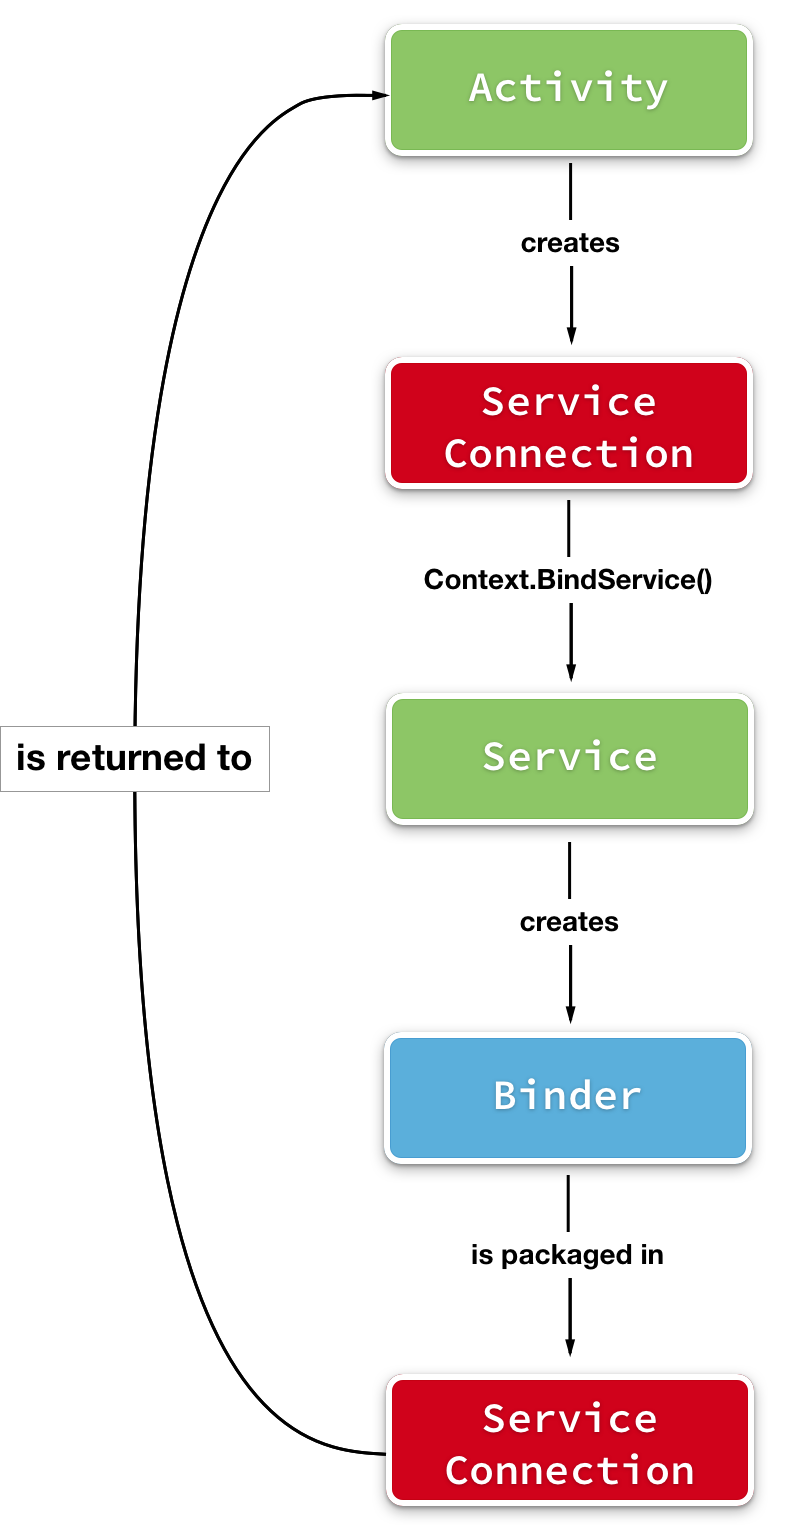 A diagram showing how the service components relate to each other